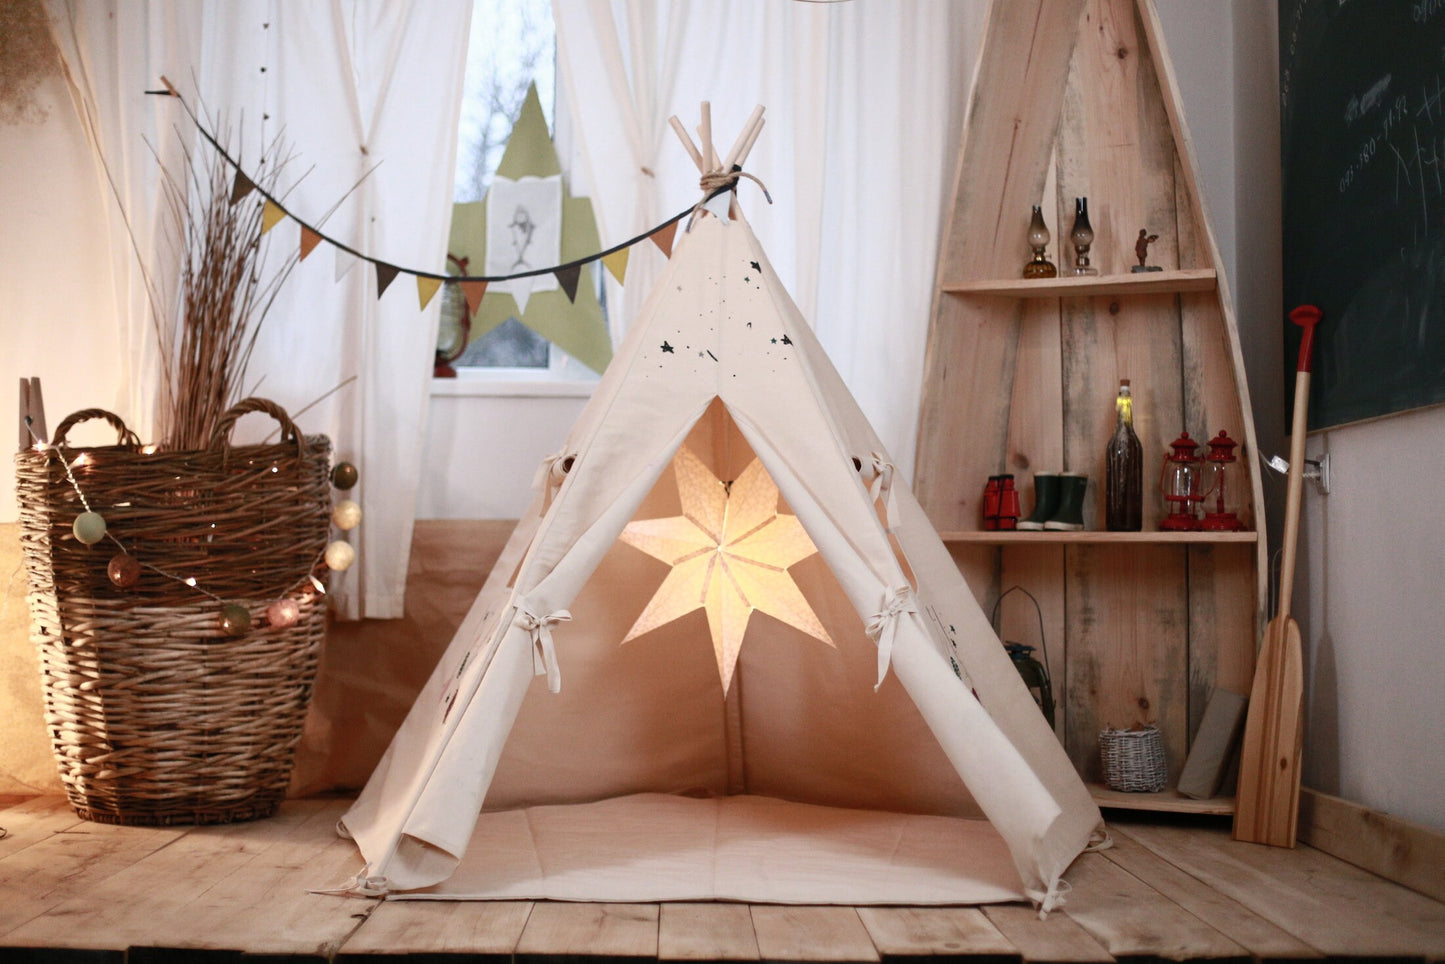 Canvas tent for every little dreamer - Indoor Playhouse/Kids Princess Tent - natural cotton, eco-friendly gift for 1st birthday or Christmas